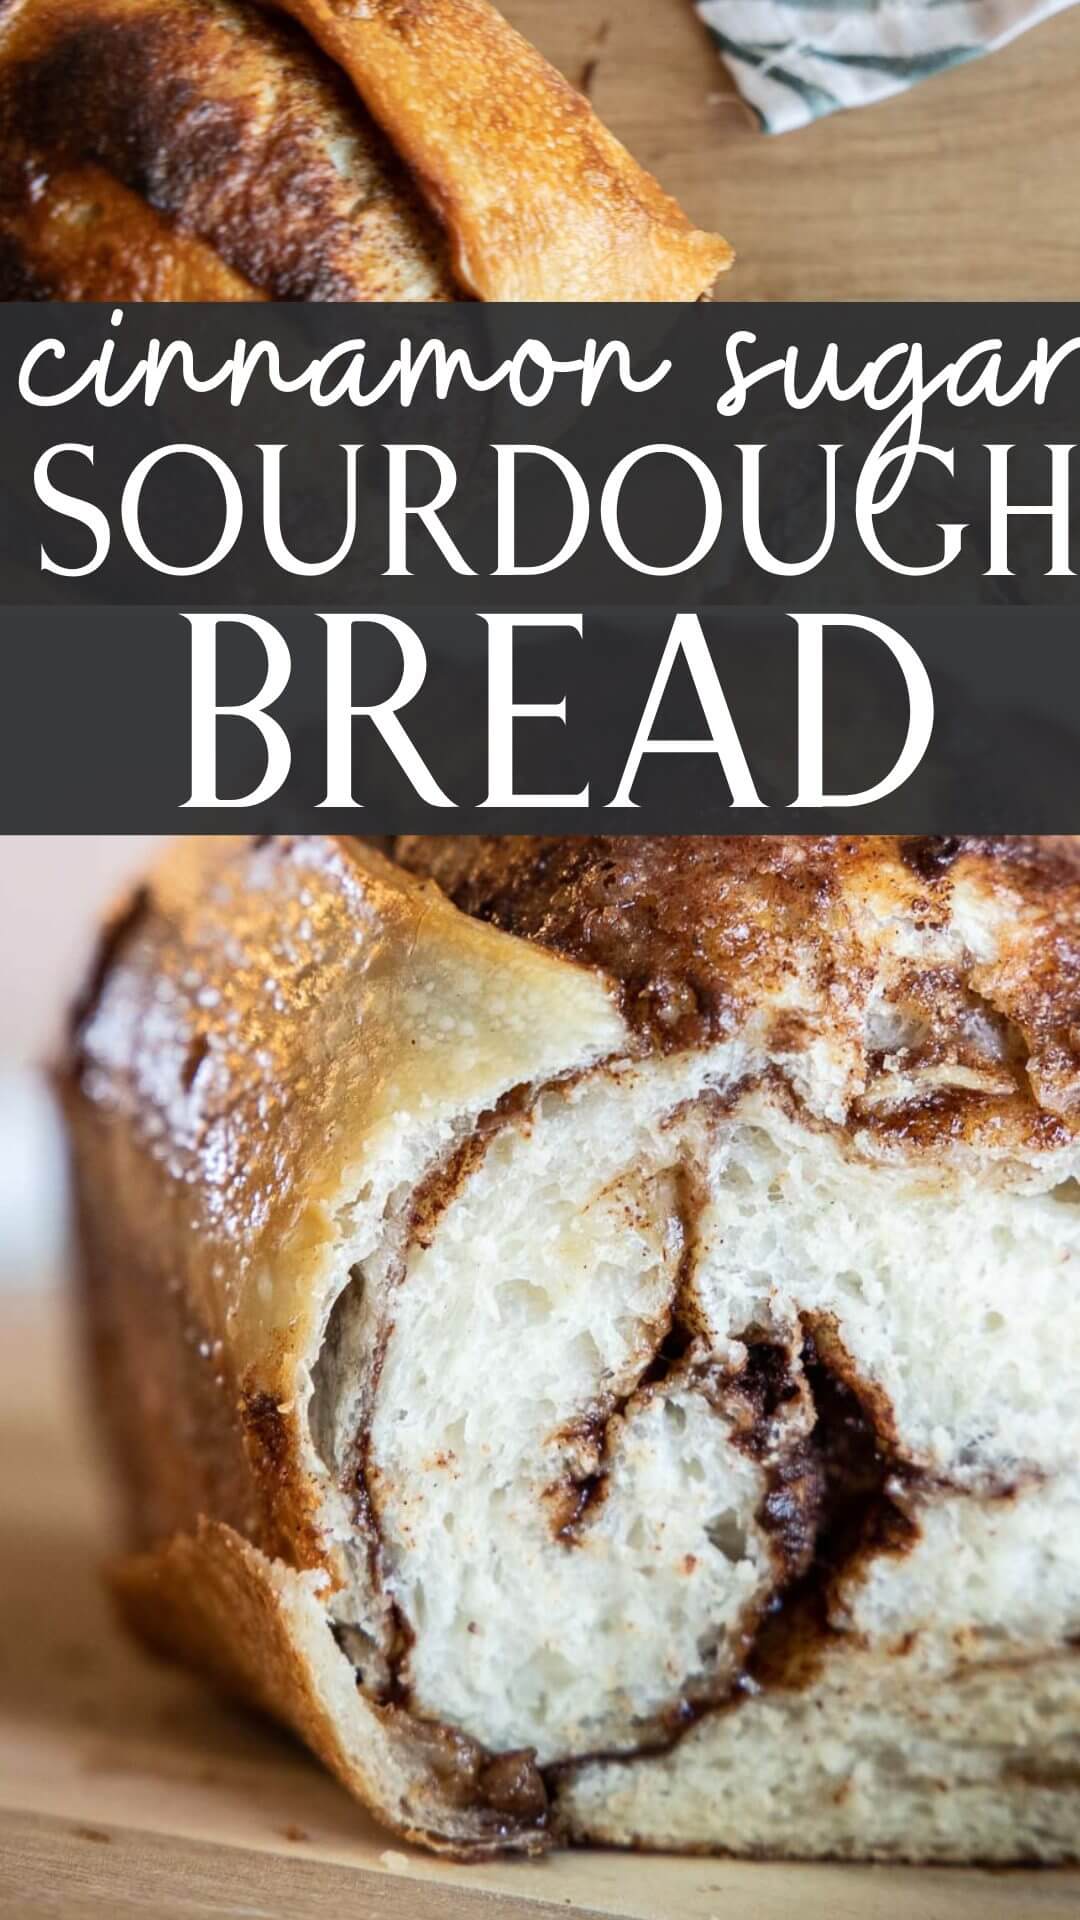 This cinnamon sugar sourdough bread is incredible! The cinnamon sugar mixture adds sweetness and flavor! Get the recipe here!